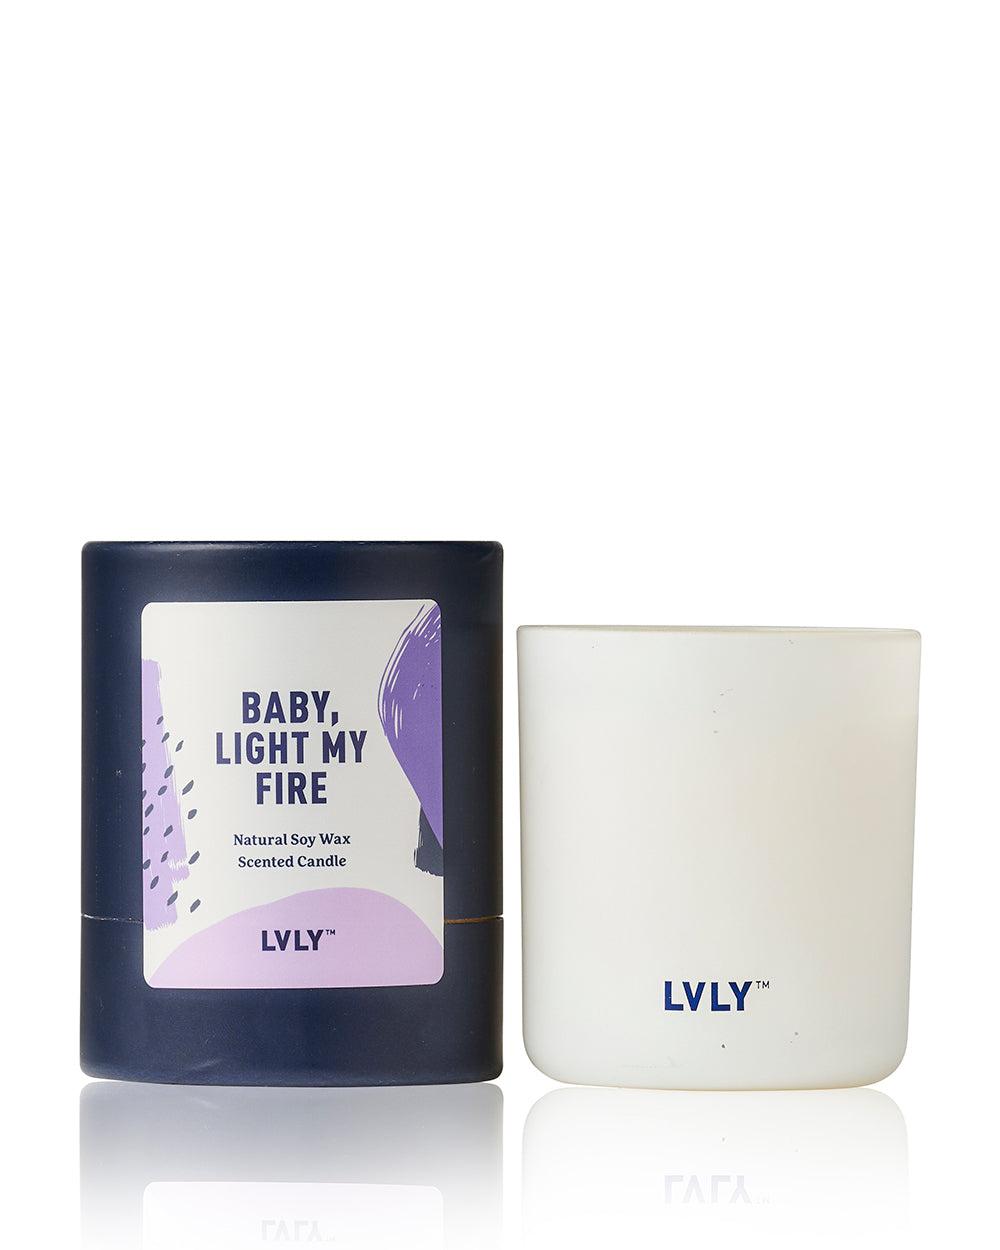 'Baby light my fire' Candle